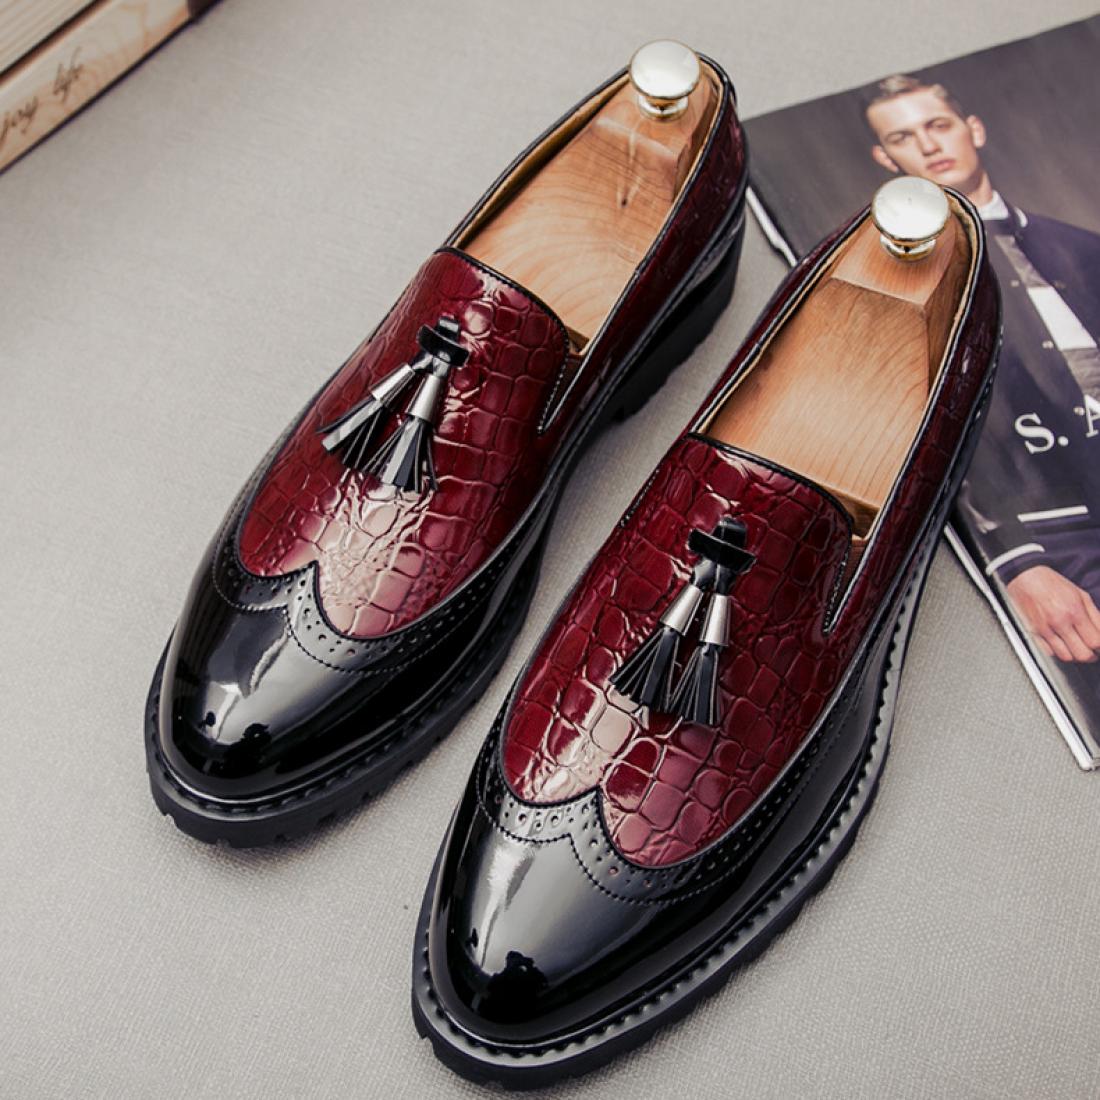 Burgundy Tassels Cleated Sole Mens Loafers Flats Dress Shoes ...